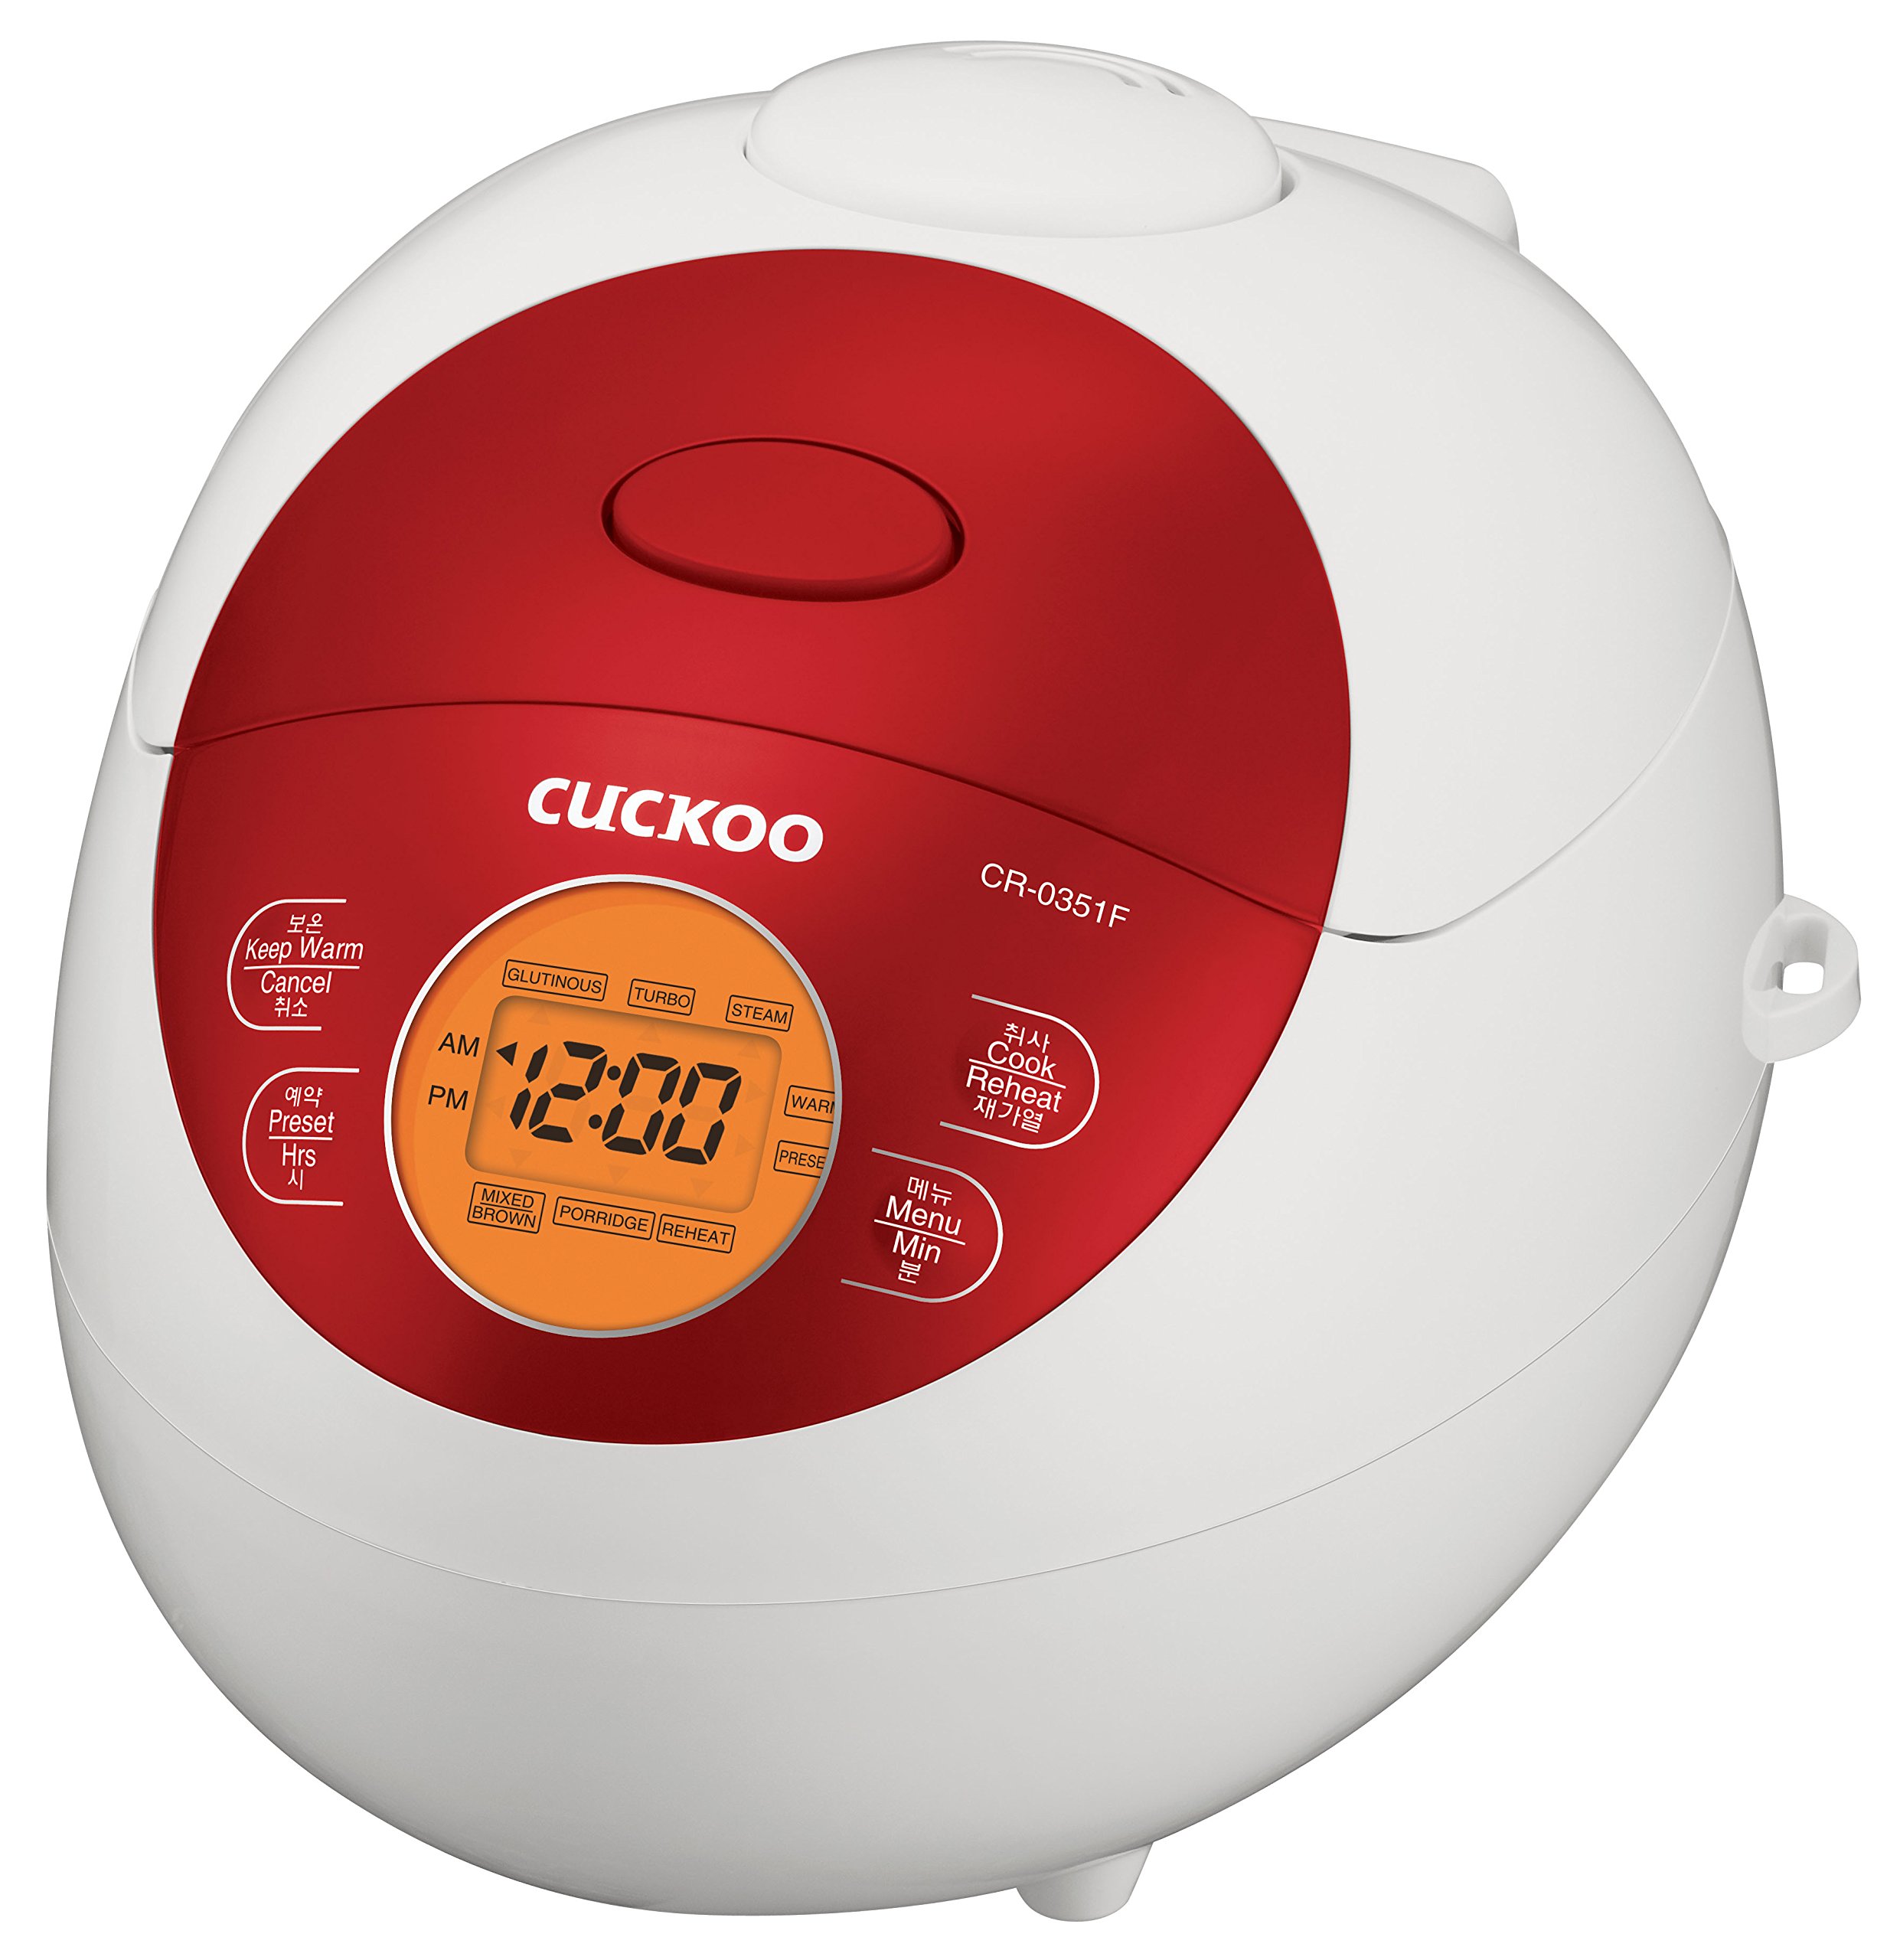 Cuckoo CR-0351FR Rice Cooker Red, 0.75 quarts